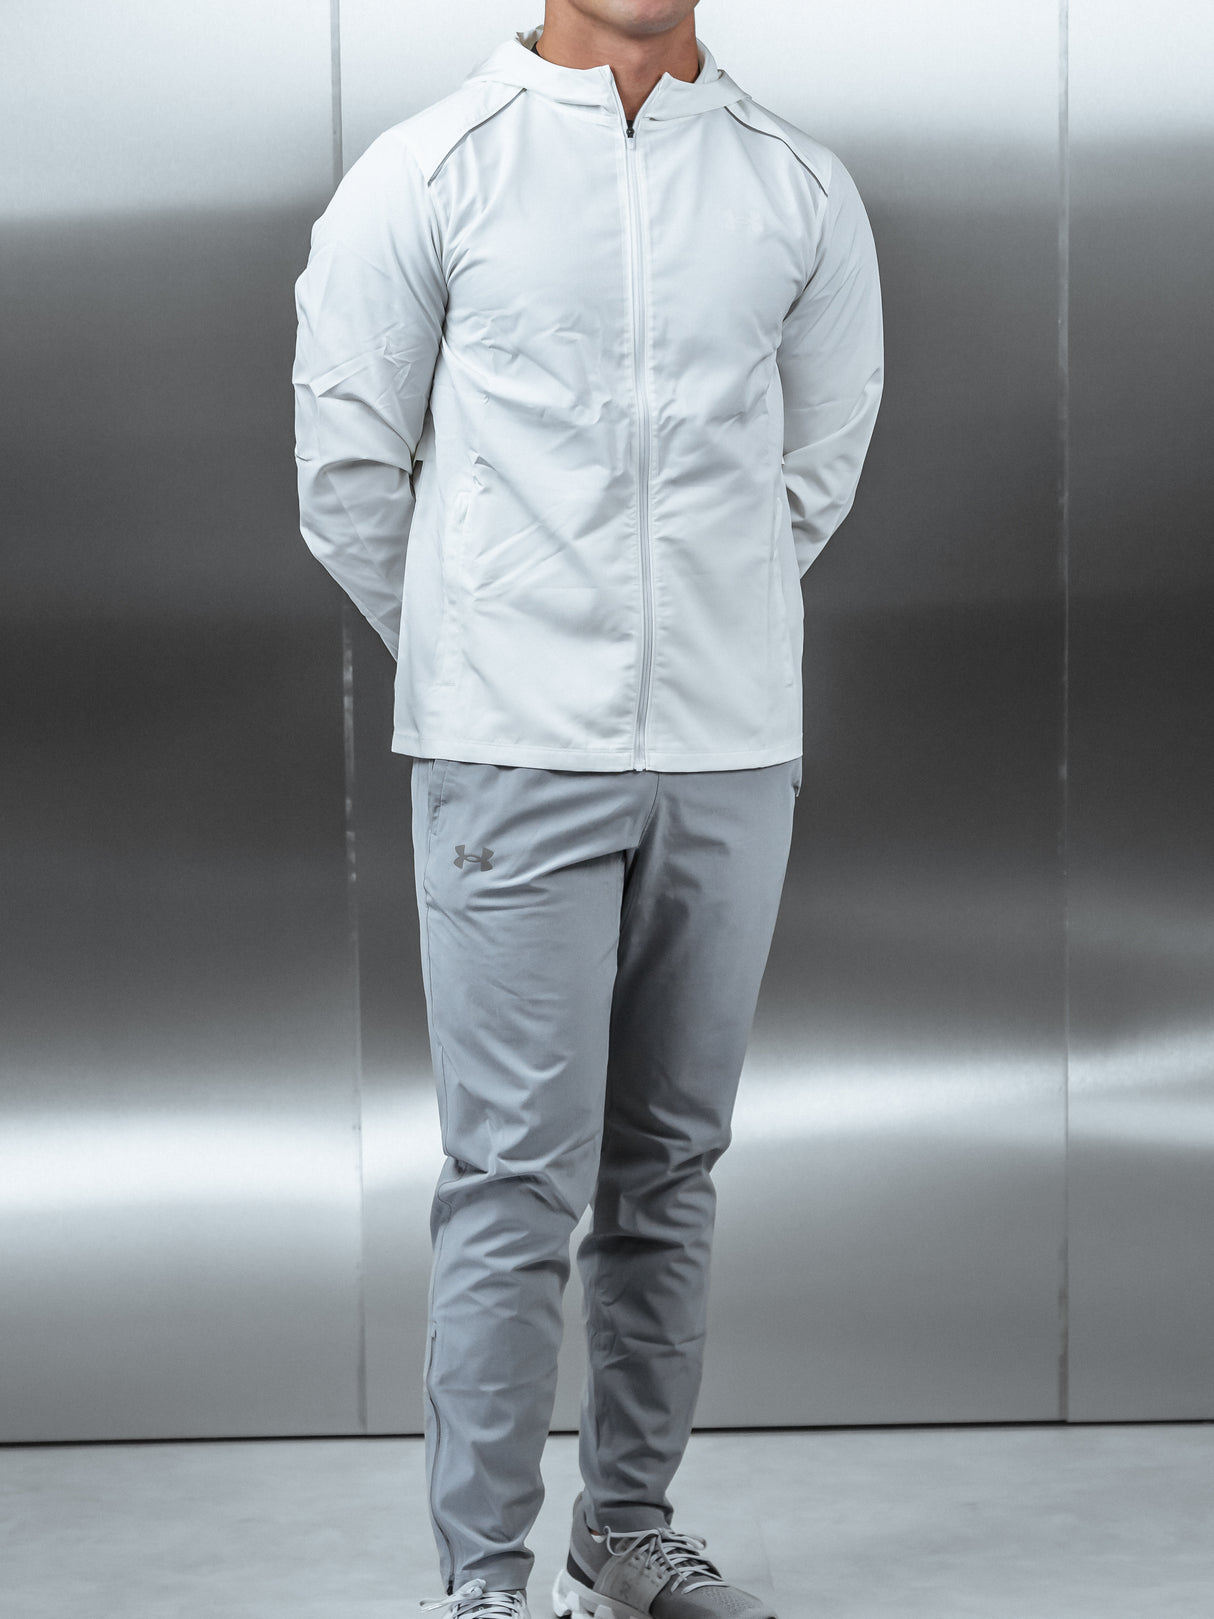 Under Armour - Storm Run Tracksuit - White/Grey